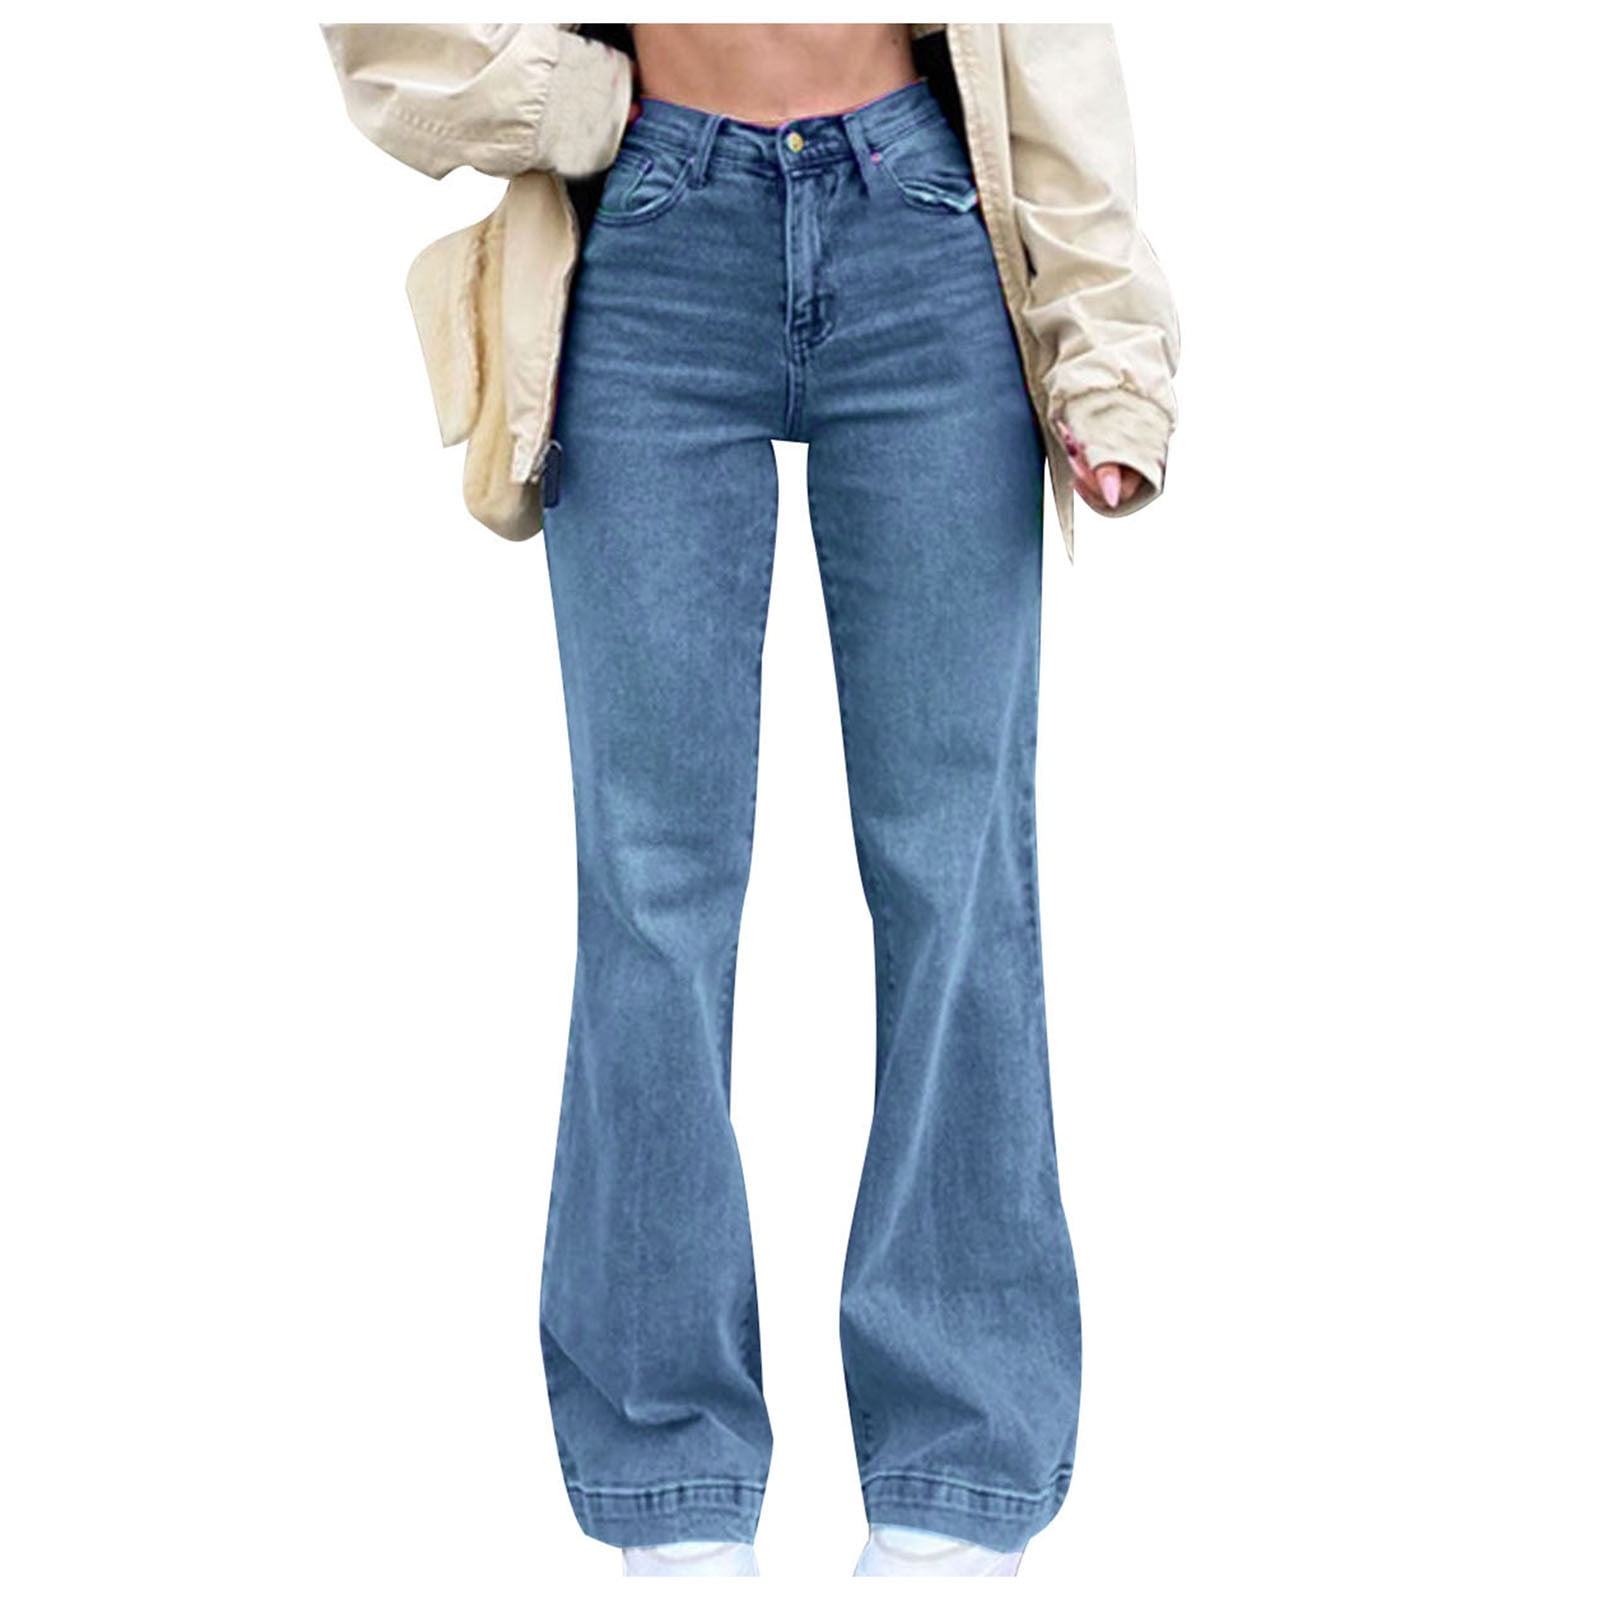 Women's By Together Jeans, Wide Leg, Multi Button - Chick Elms Grand Entry  Western Store and Rodeo Shop